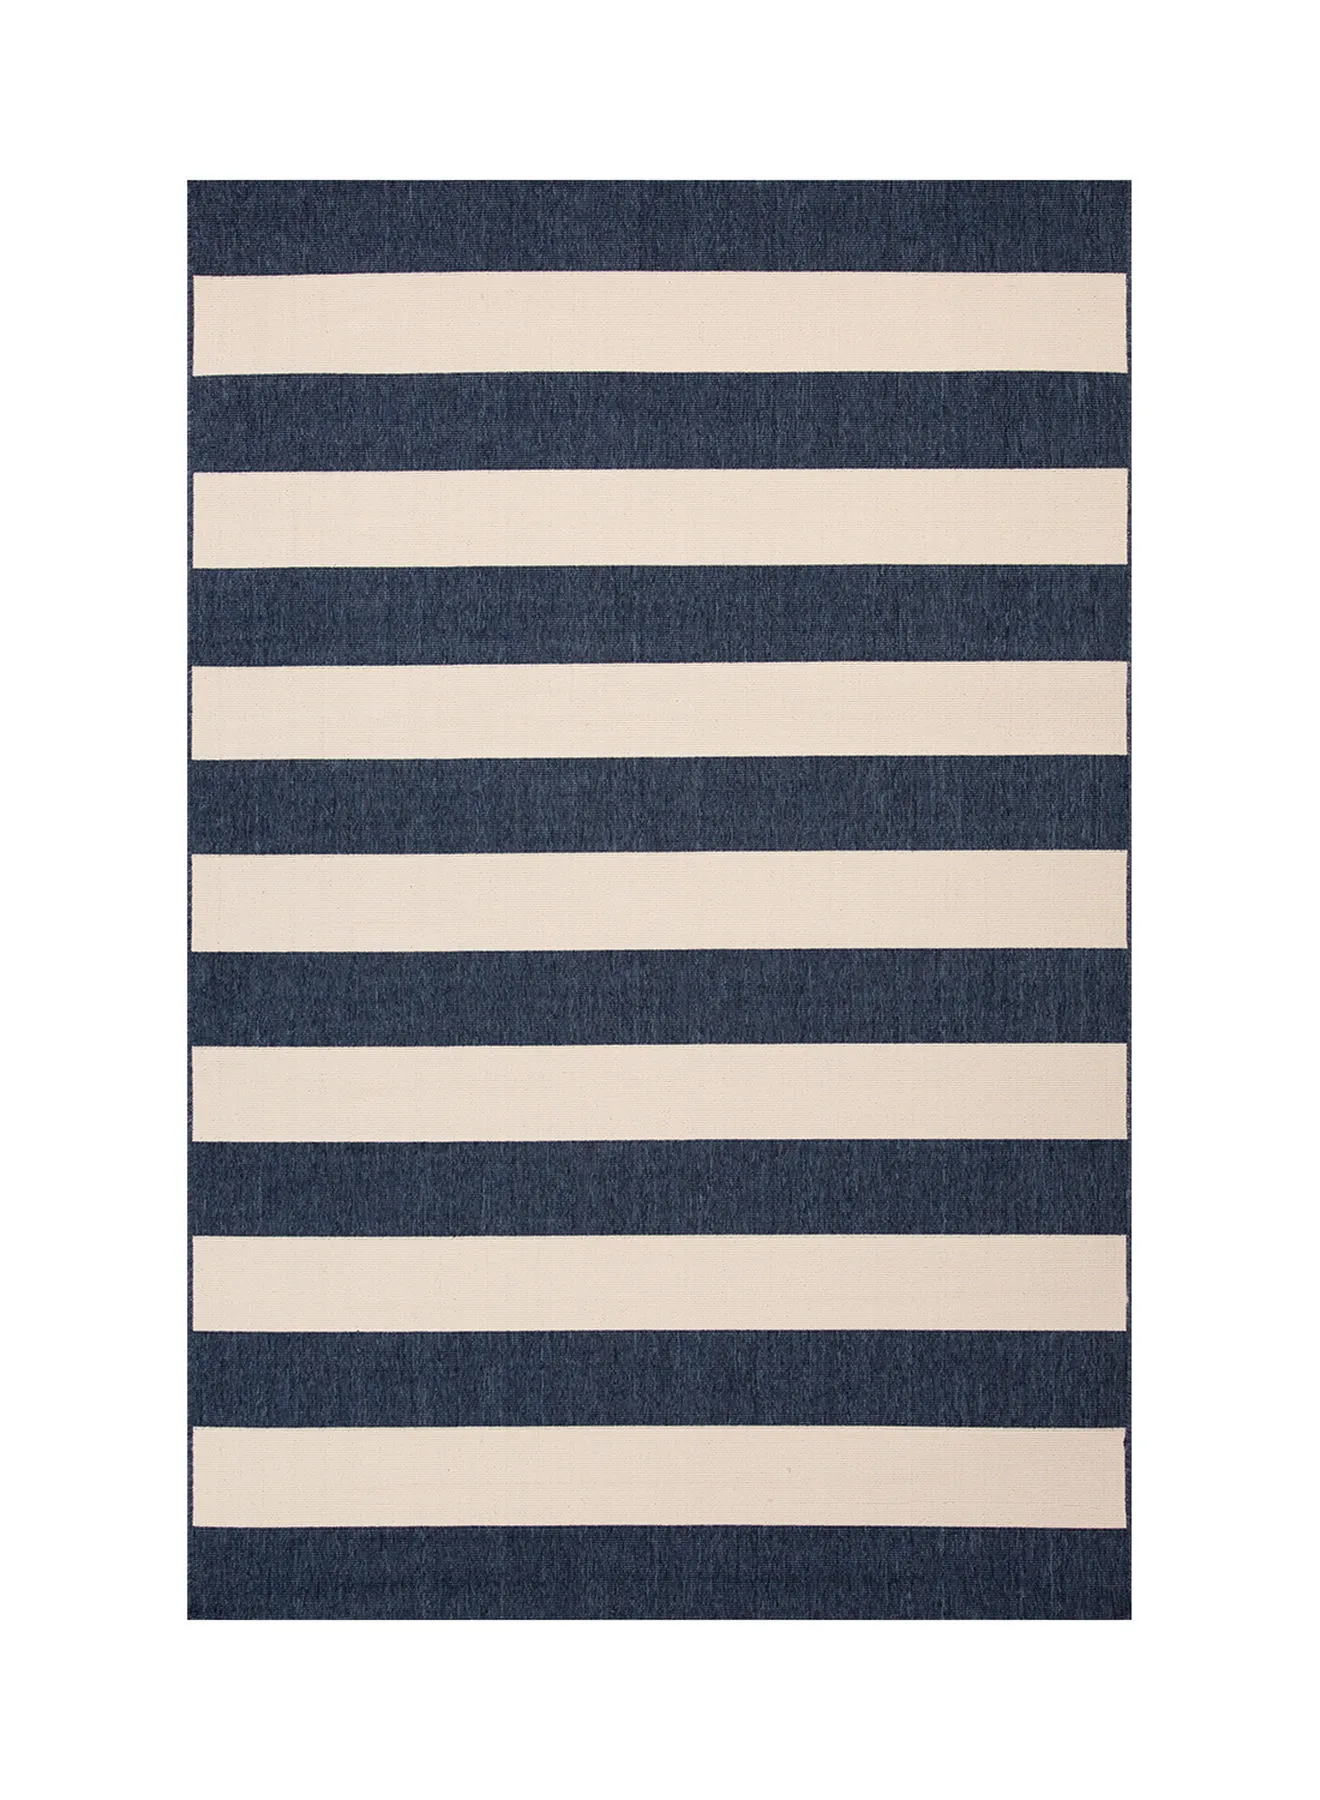 ebb & flow L. Tributary Outdoor Unique Luxury Quality Material Carpet For The Perfect Stylish Home 4465B Blue/White 120 x 170cm